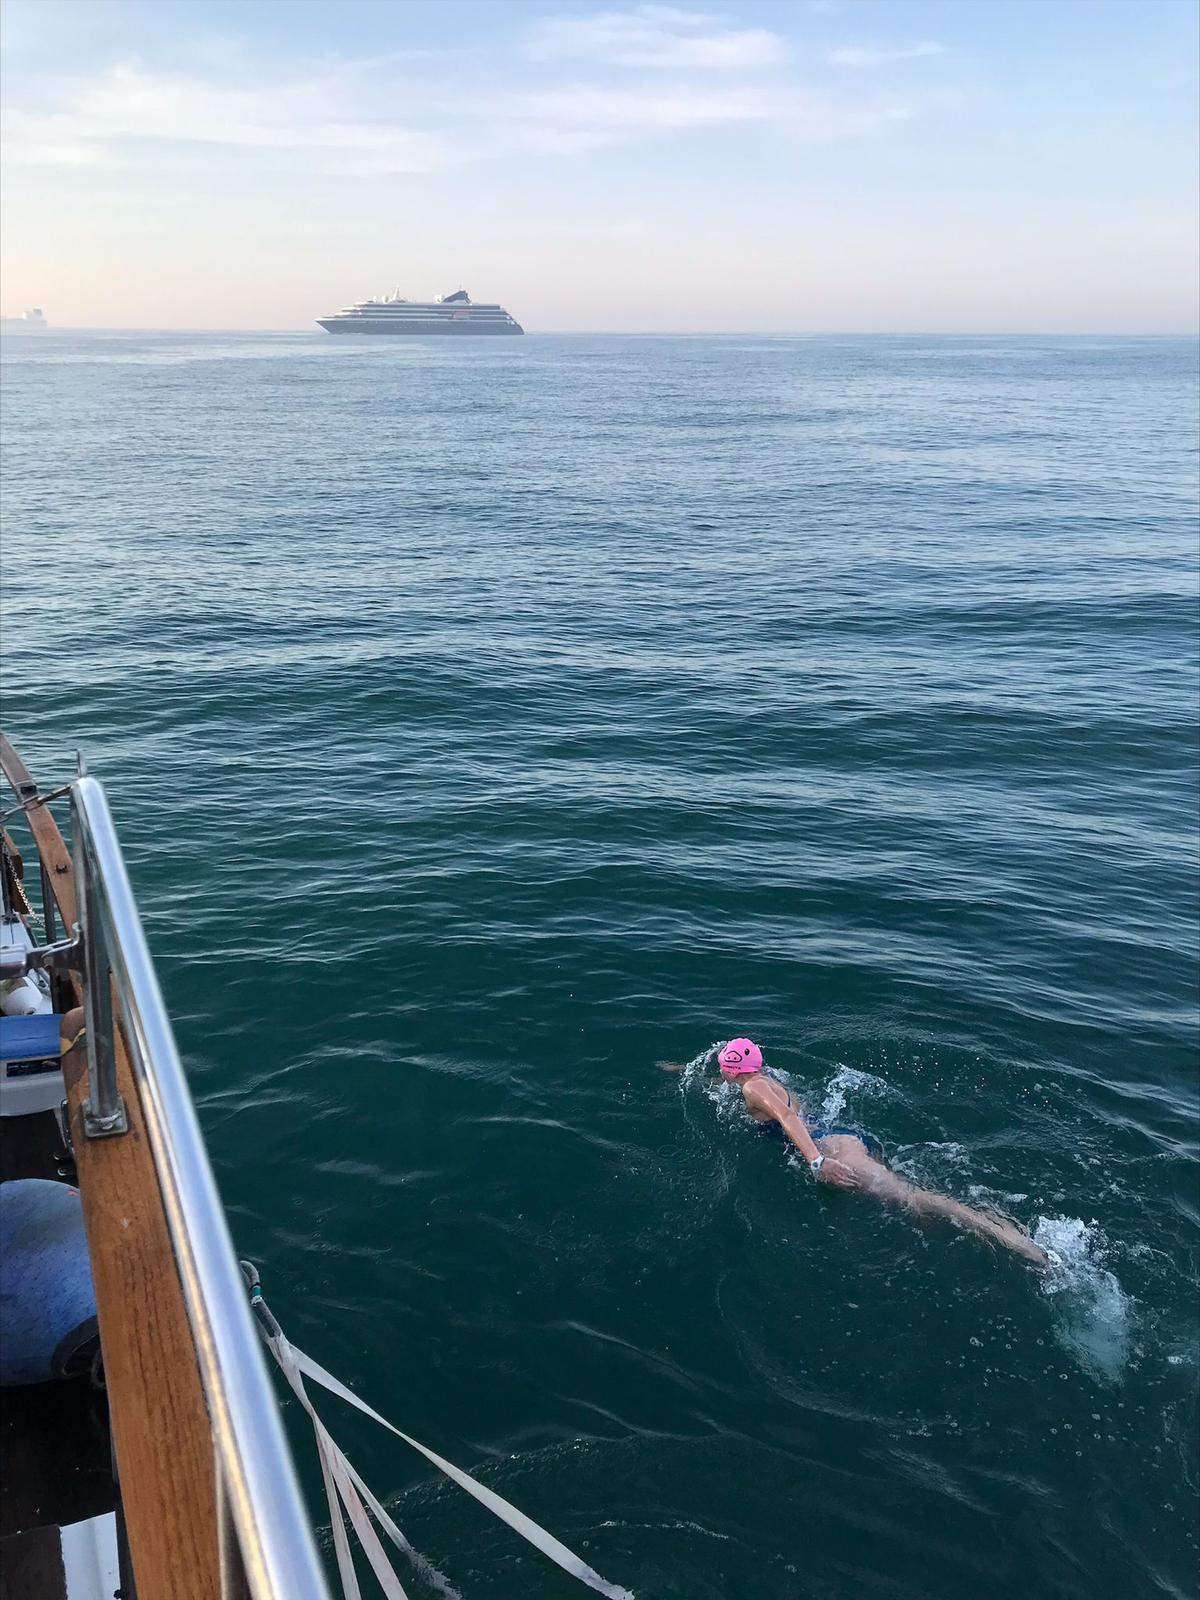 Swimming the channel